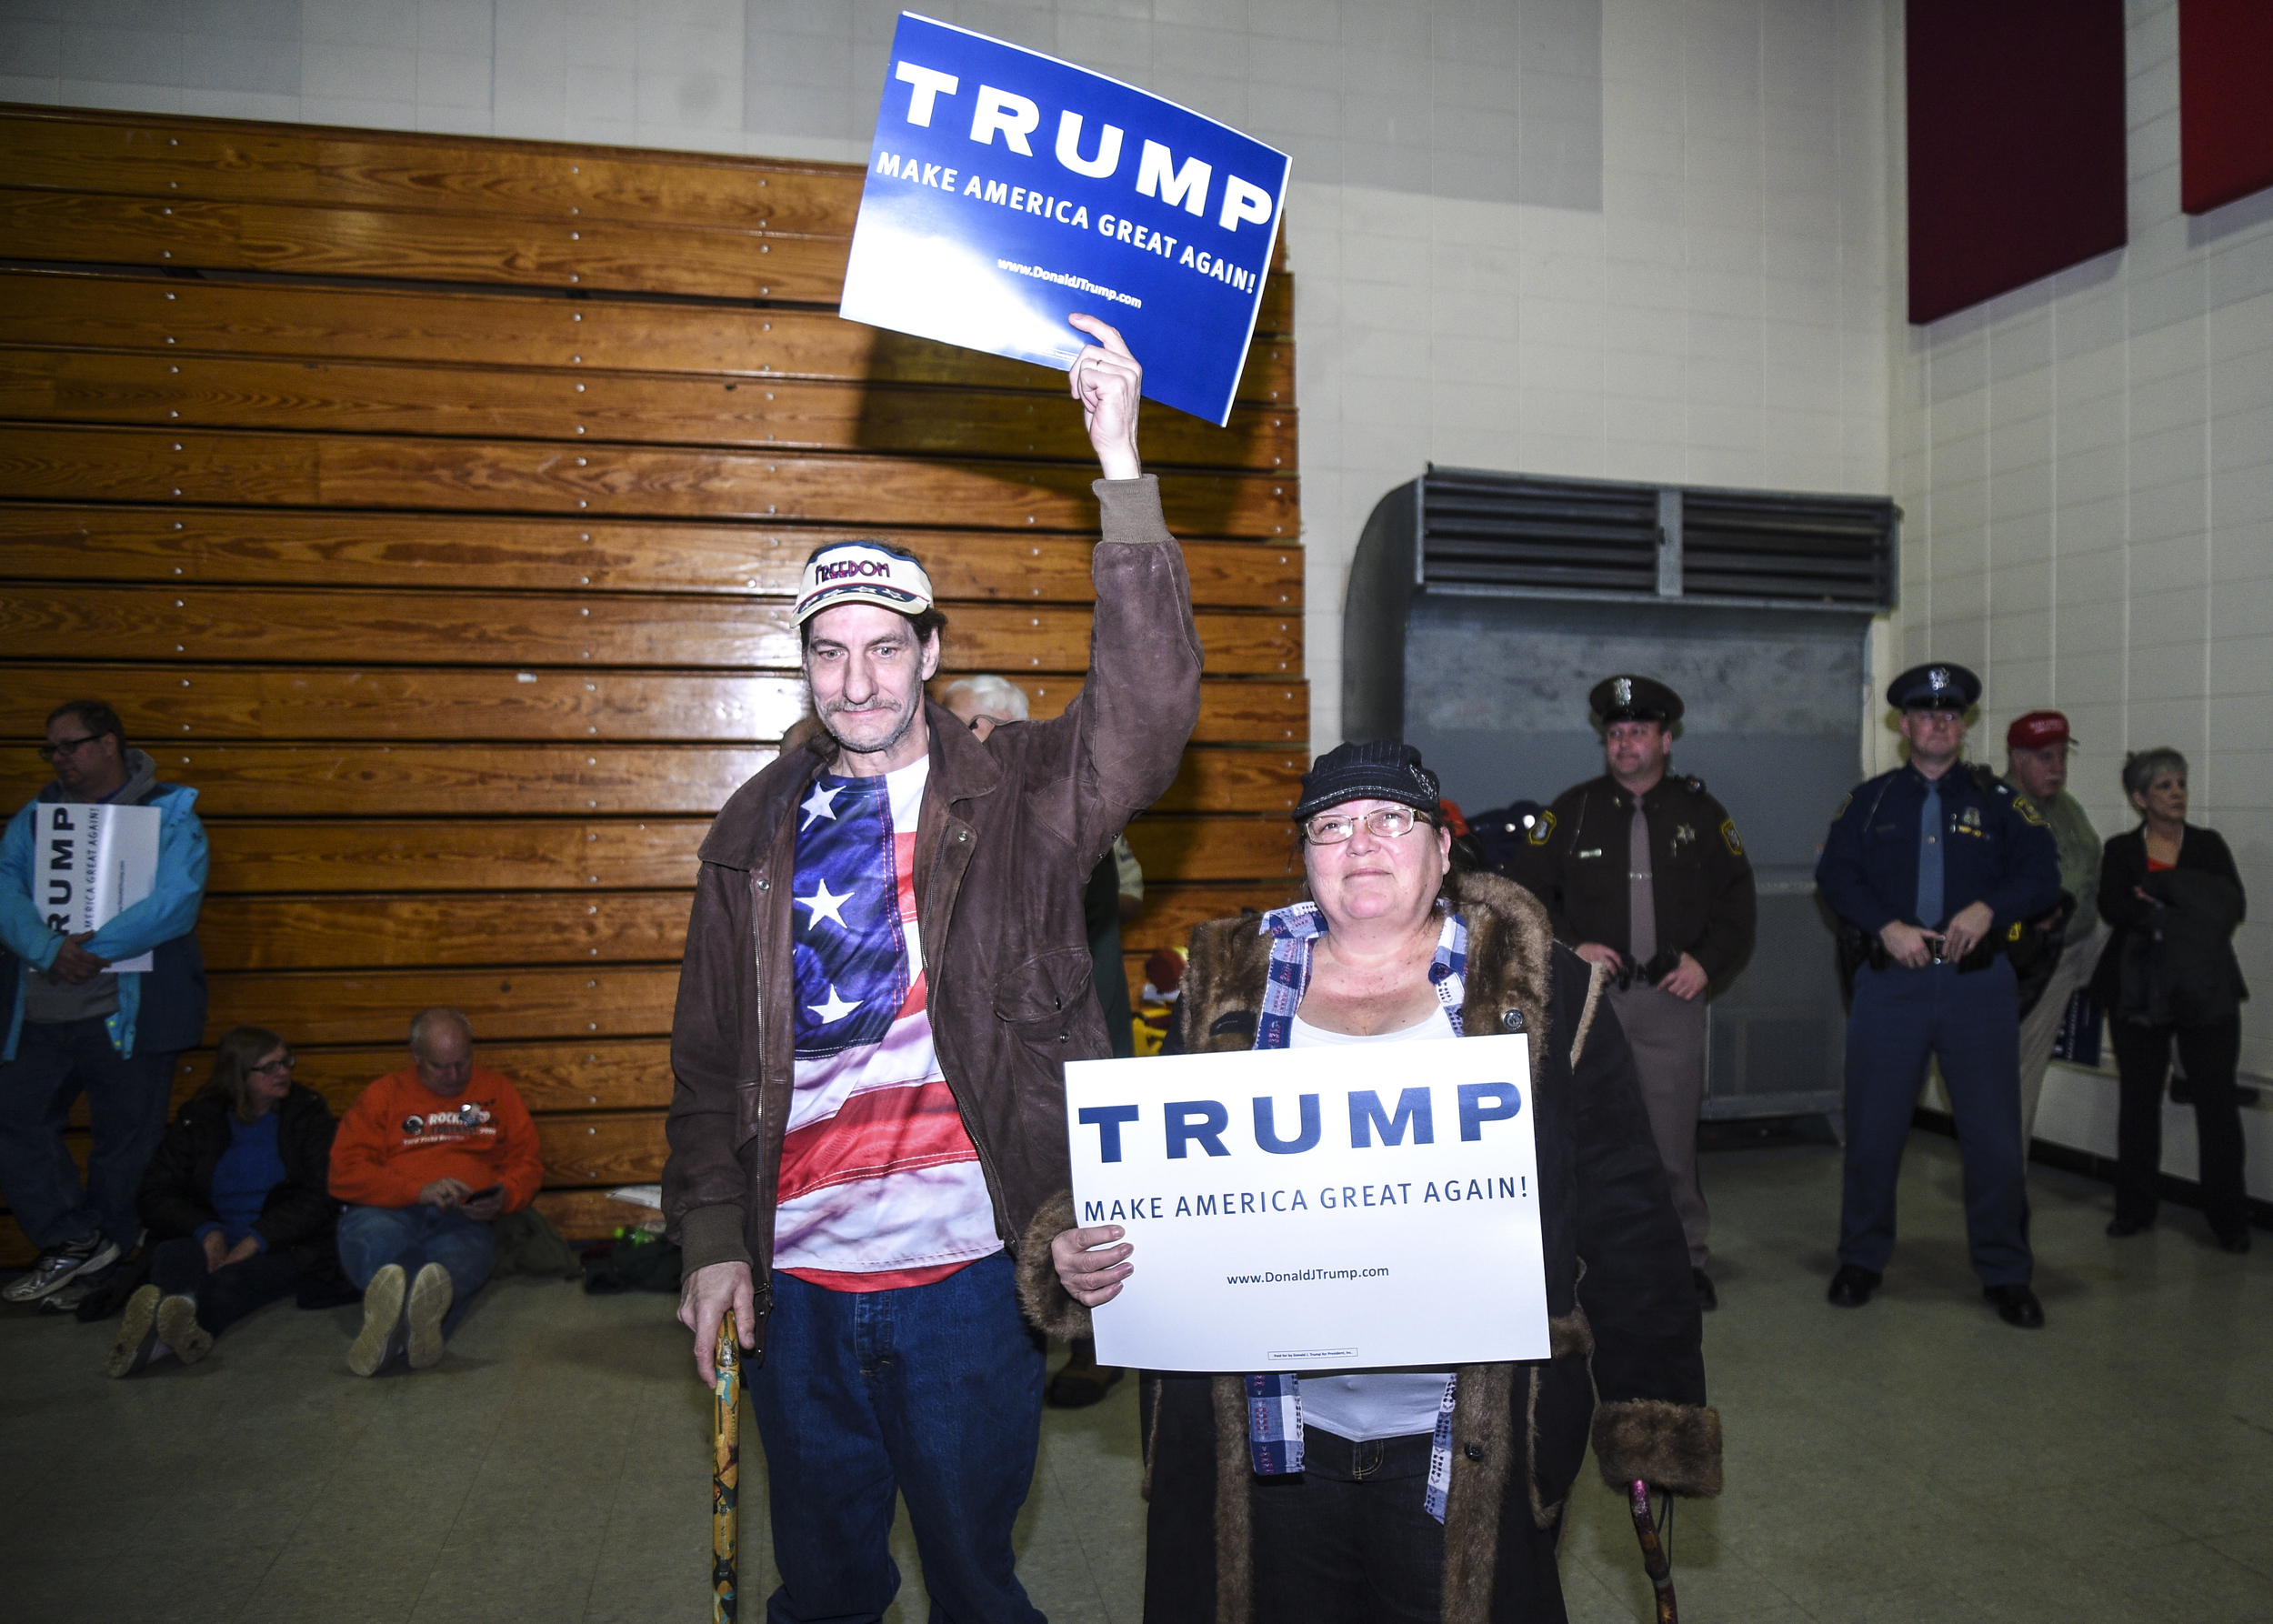  Andrew Emory and his wife Machelle Emory hold signs in support of Donald Trump for president during the rally at the Wexford County Civic Center Friday, March 4, 2016 in Cadillac, Mich. 